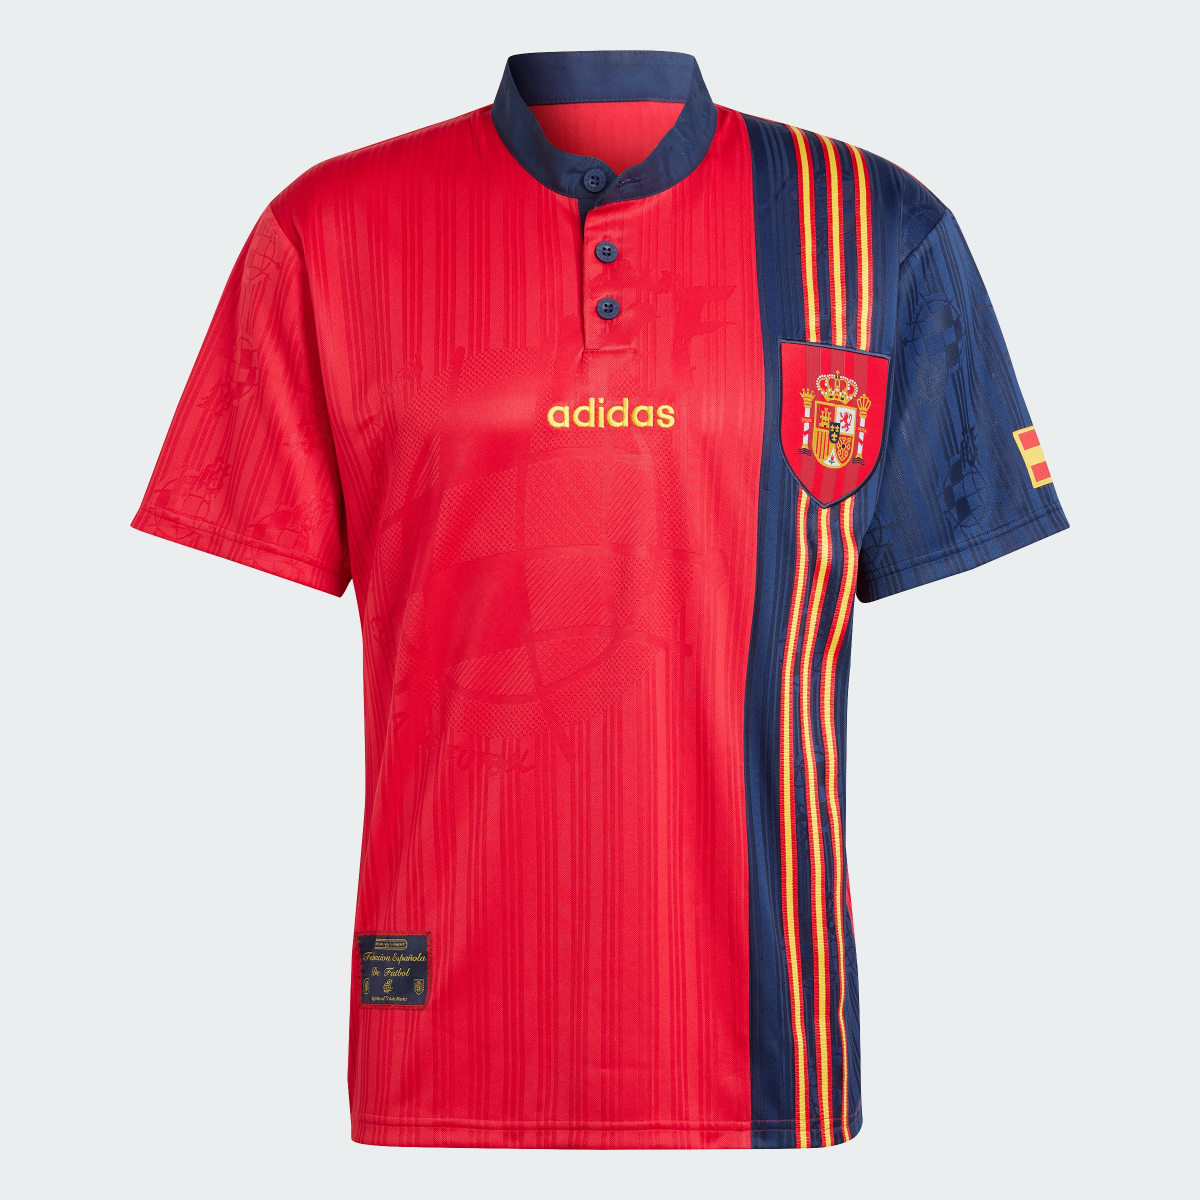 Adidas Spain 1996 Home Jersey. 5